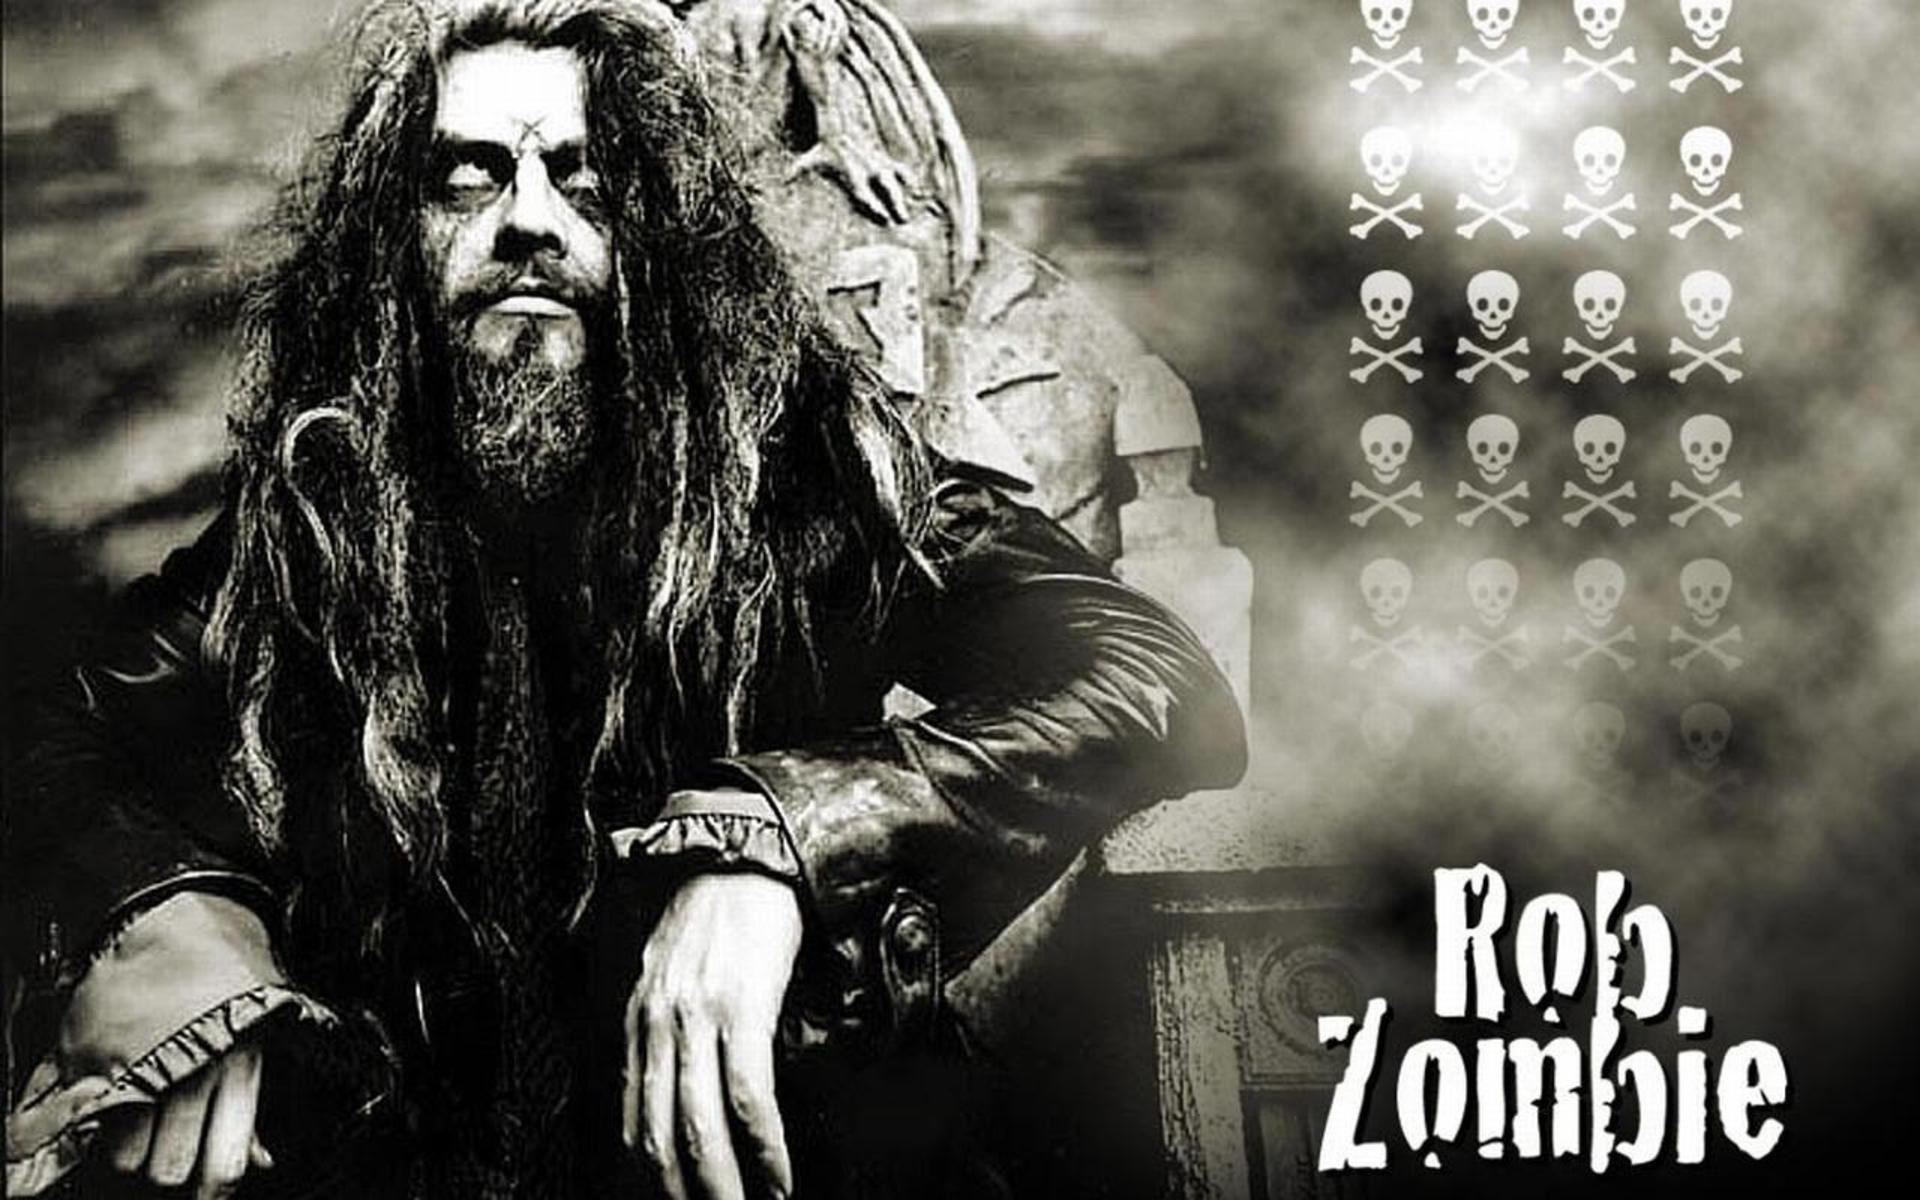 Happy birthday to Rob Zombie!!! Love his music and movies 